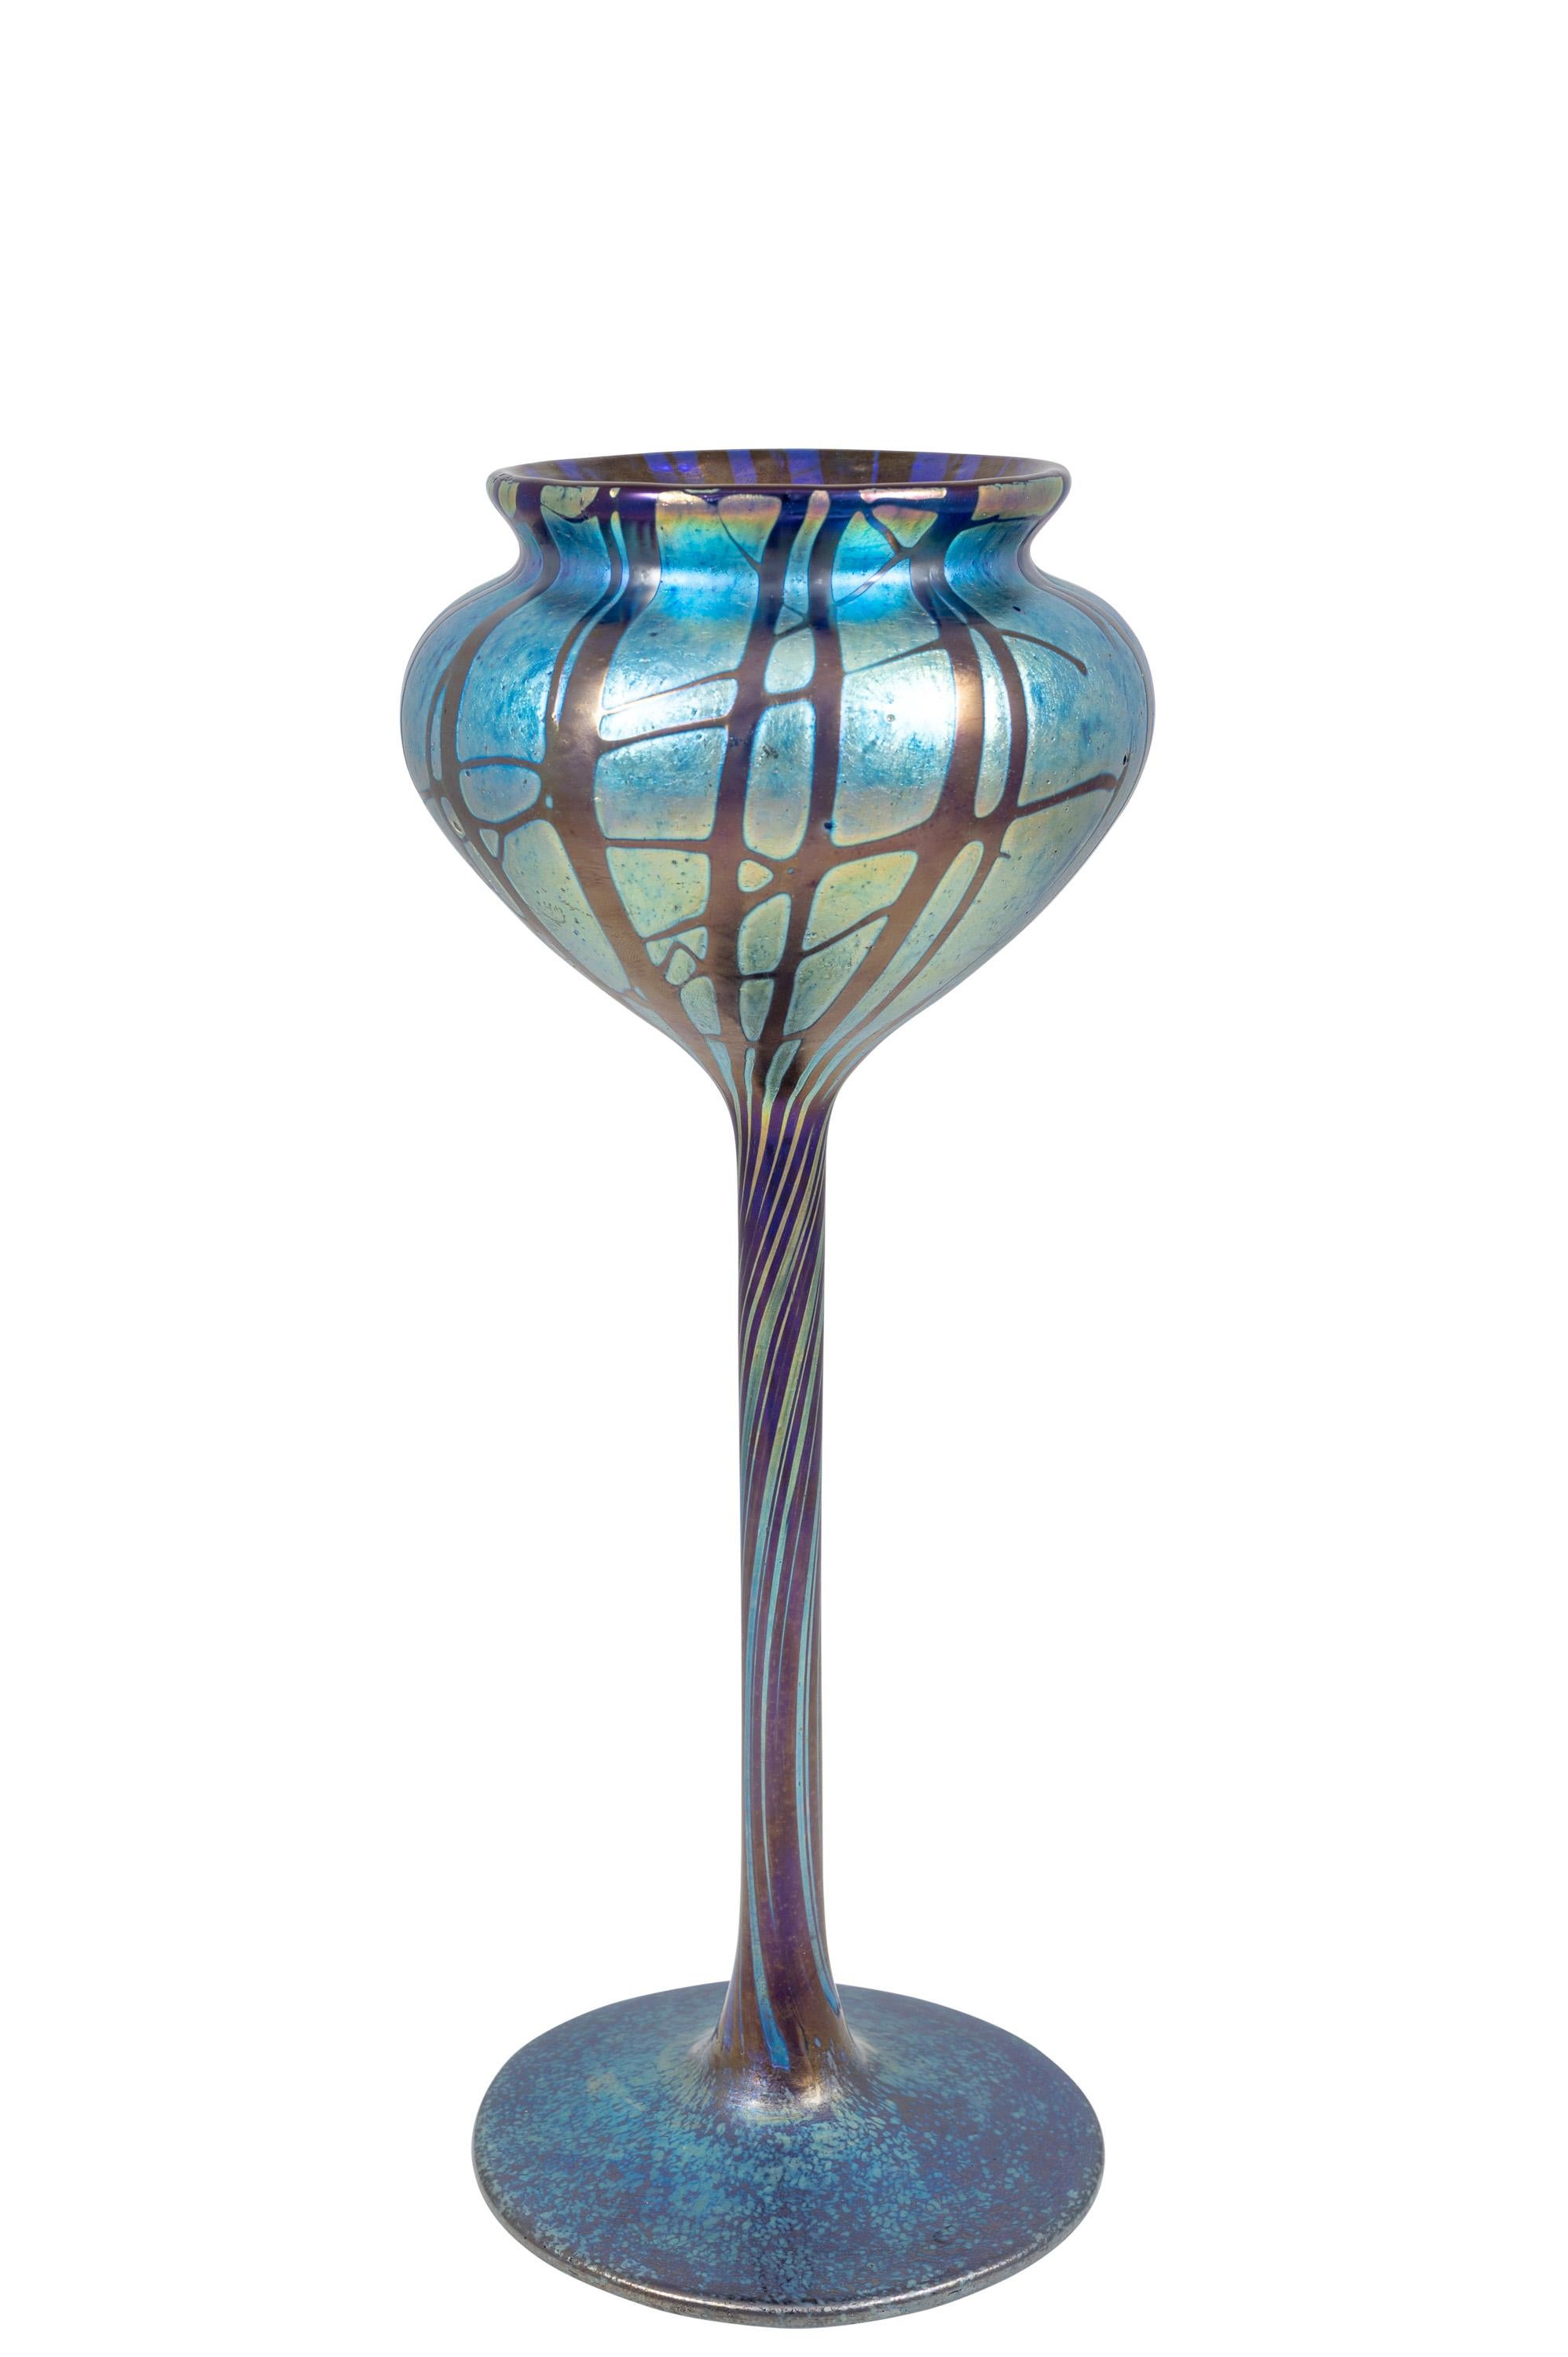 Bohemian glass vase, manufactured by Johann Loetz Witwe, Pampas Cobalt decoration, ca. 1899, Blue, Silver, Viennese Art Nouveau, Jugendstil, Art Deco, art glass, iridescent glass.

Technique and material: Glass, mould-blown and freeform, reduced and